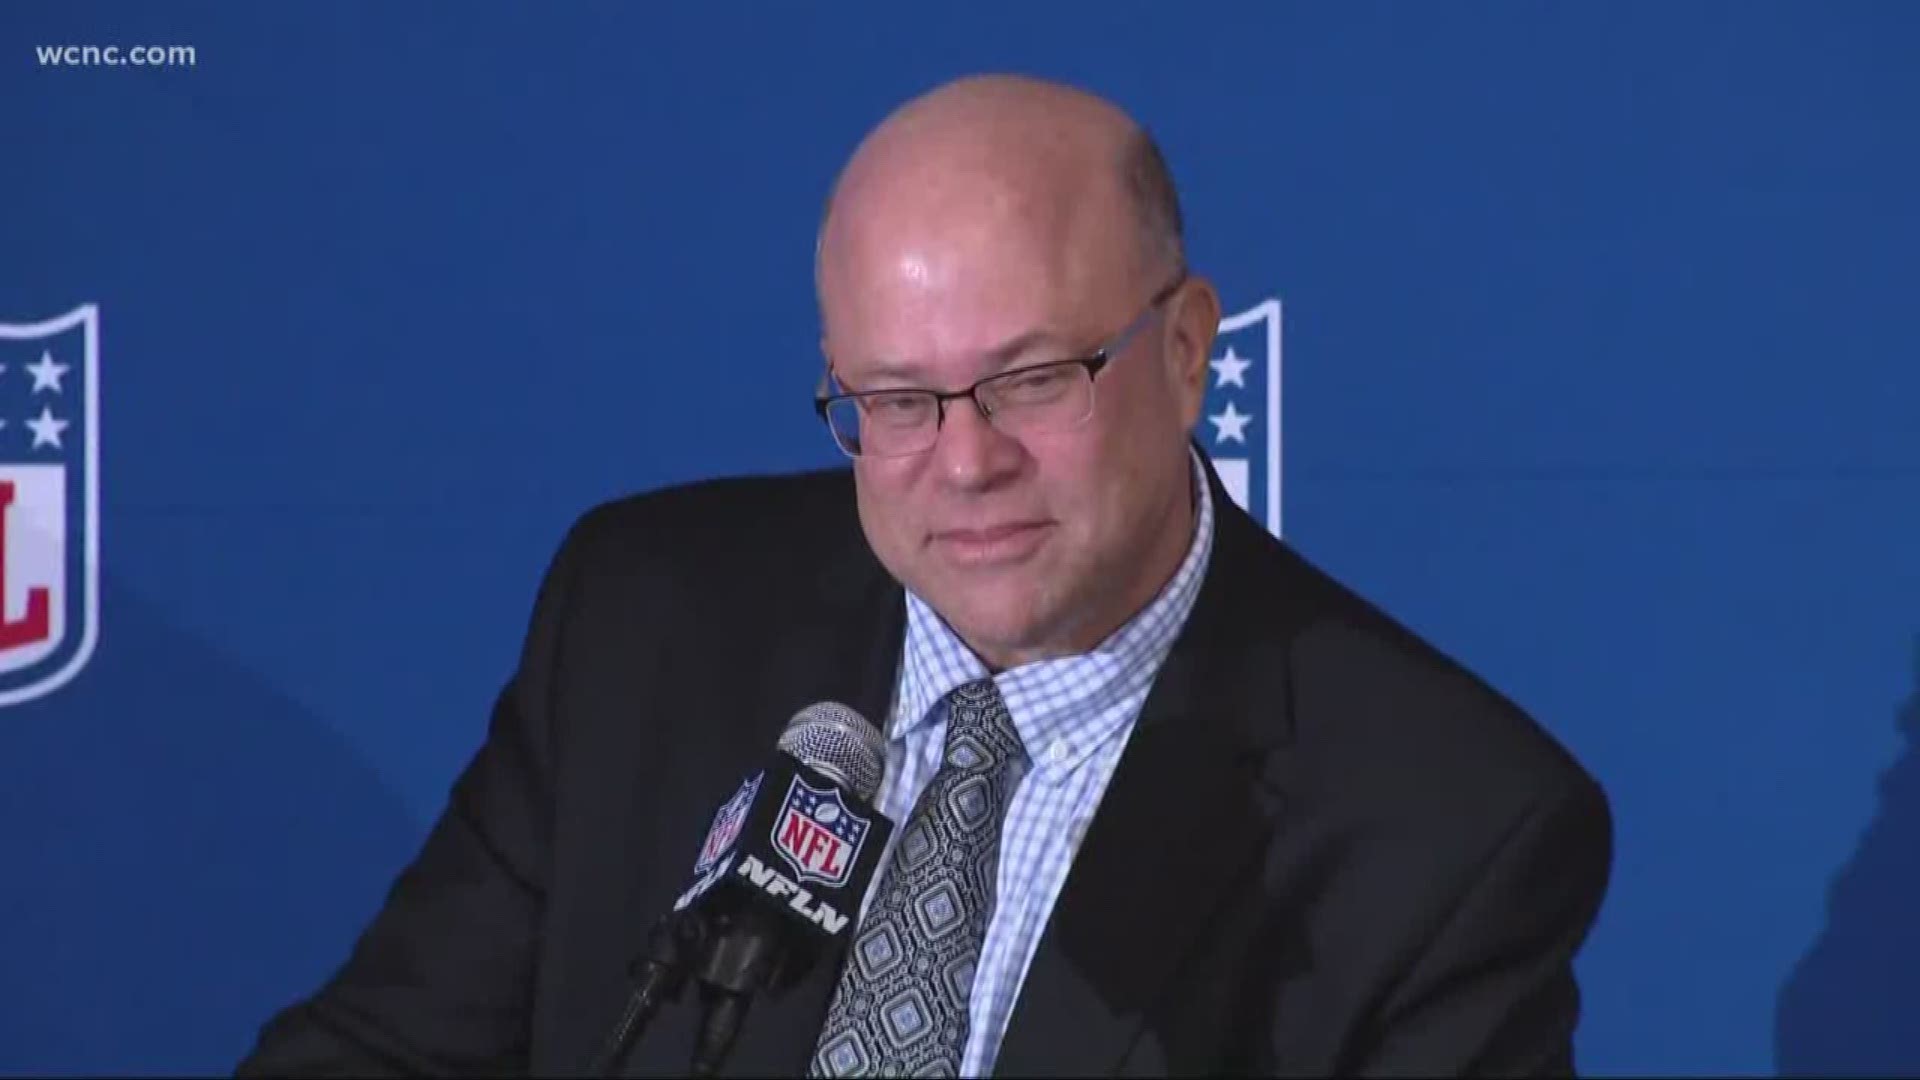 David Tepper met his fellow owners for the first time at the NFL owners meetings in Atlanta.